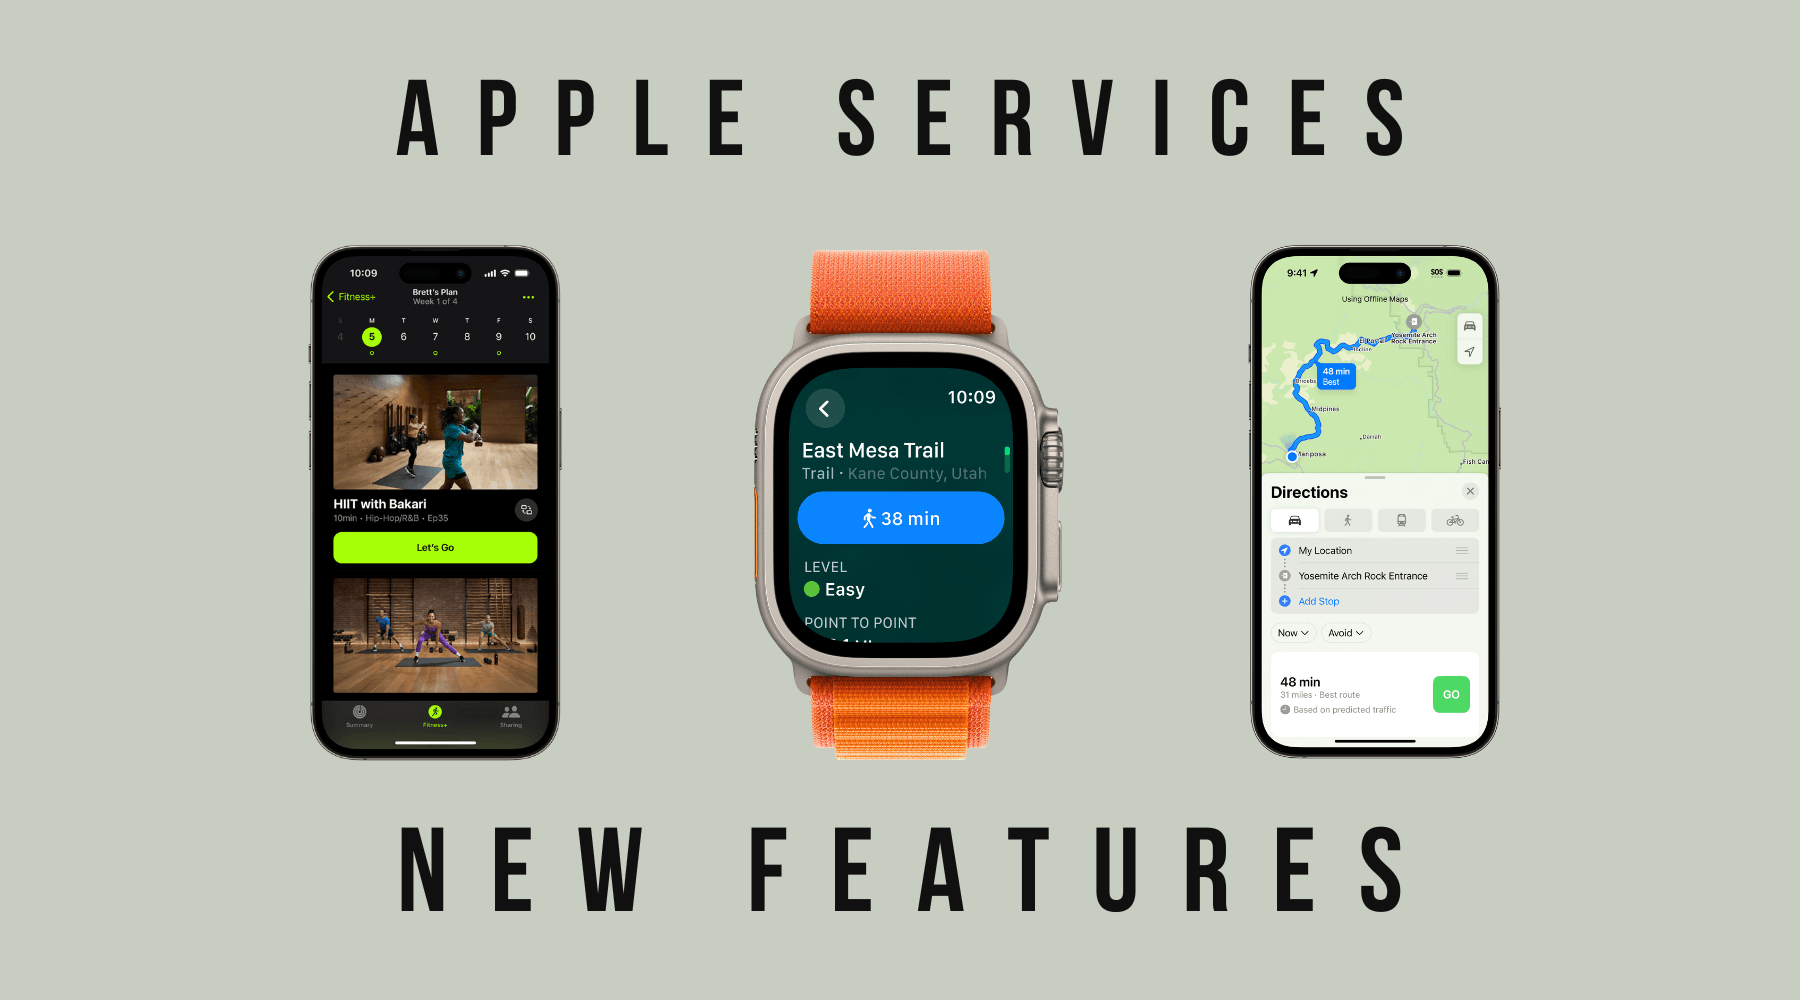 Apple Previews New Features Coming This Autumn - Buckle and Band